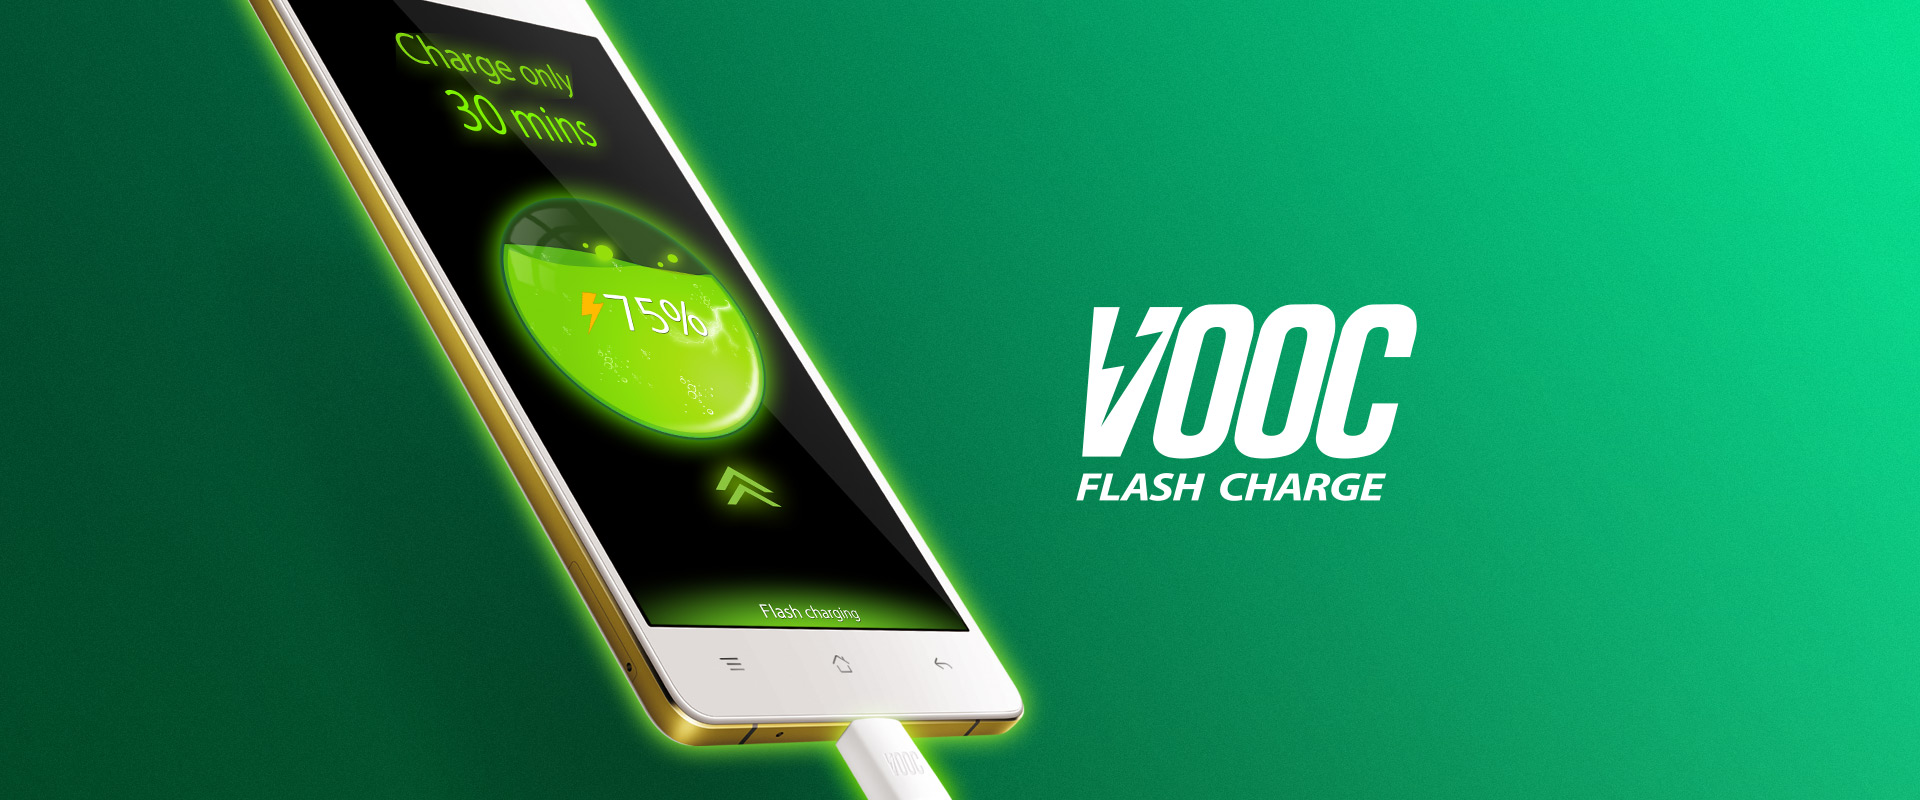 vooc charger oppo